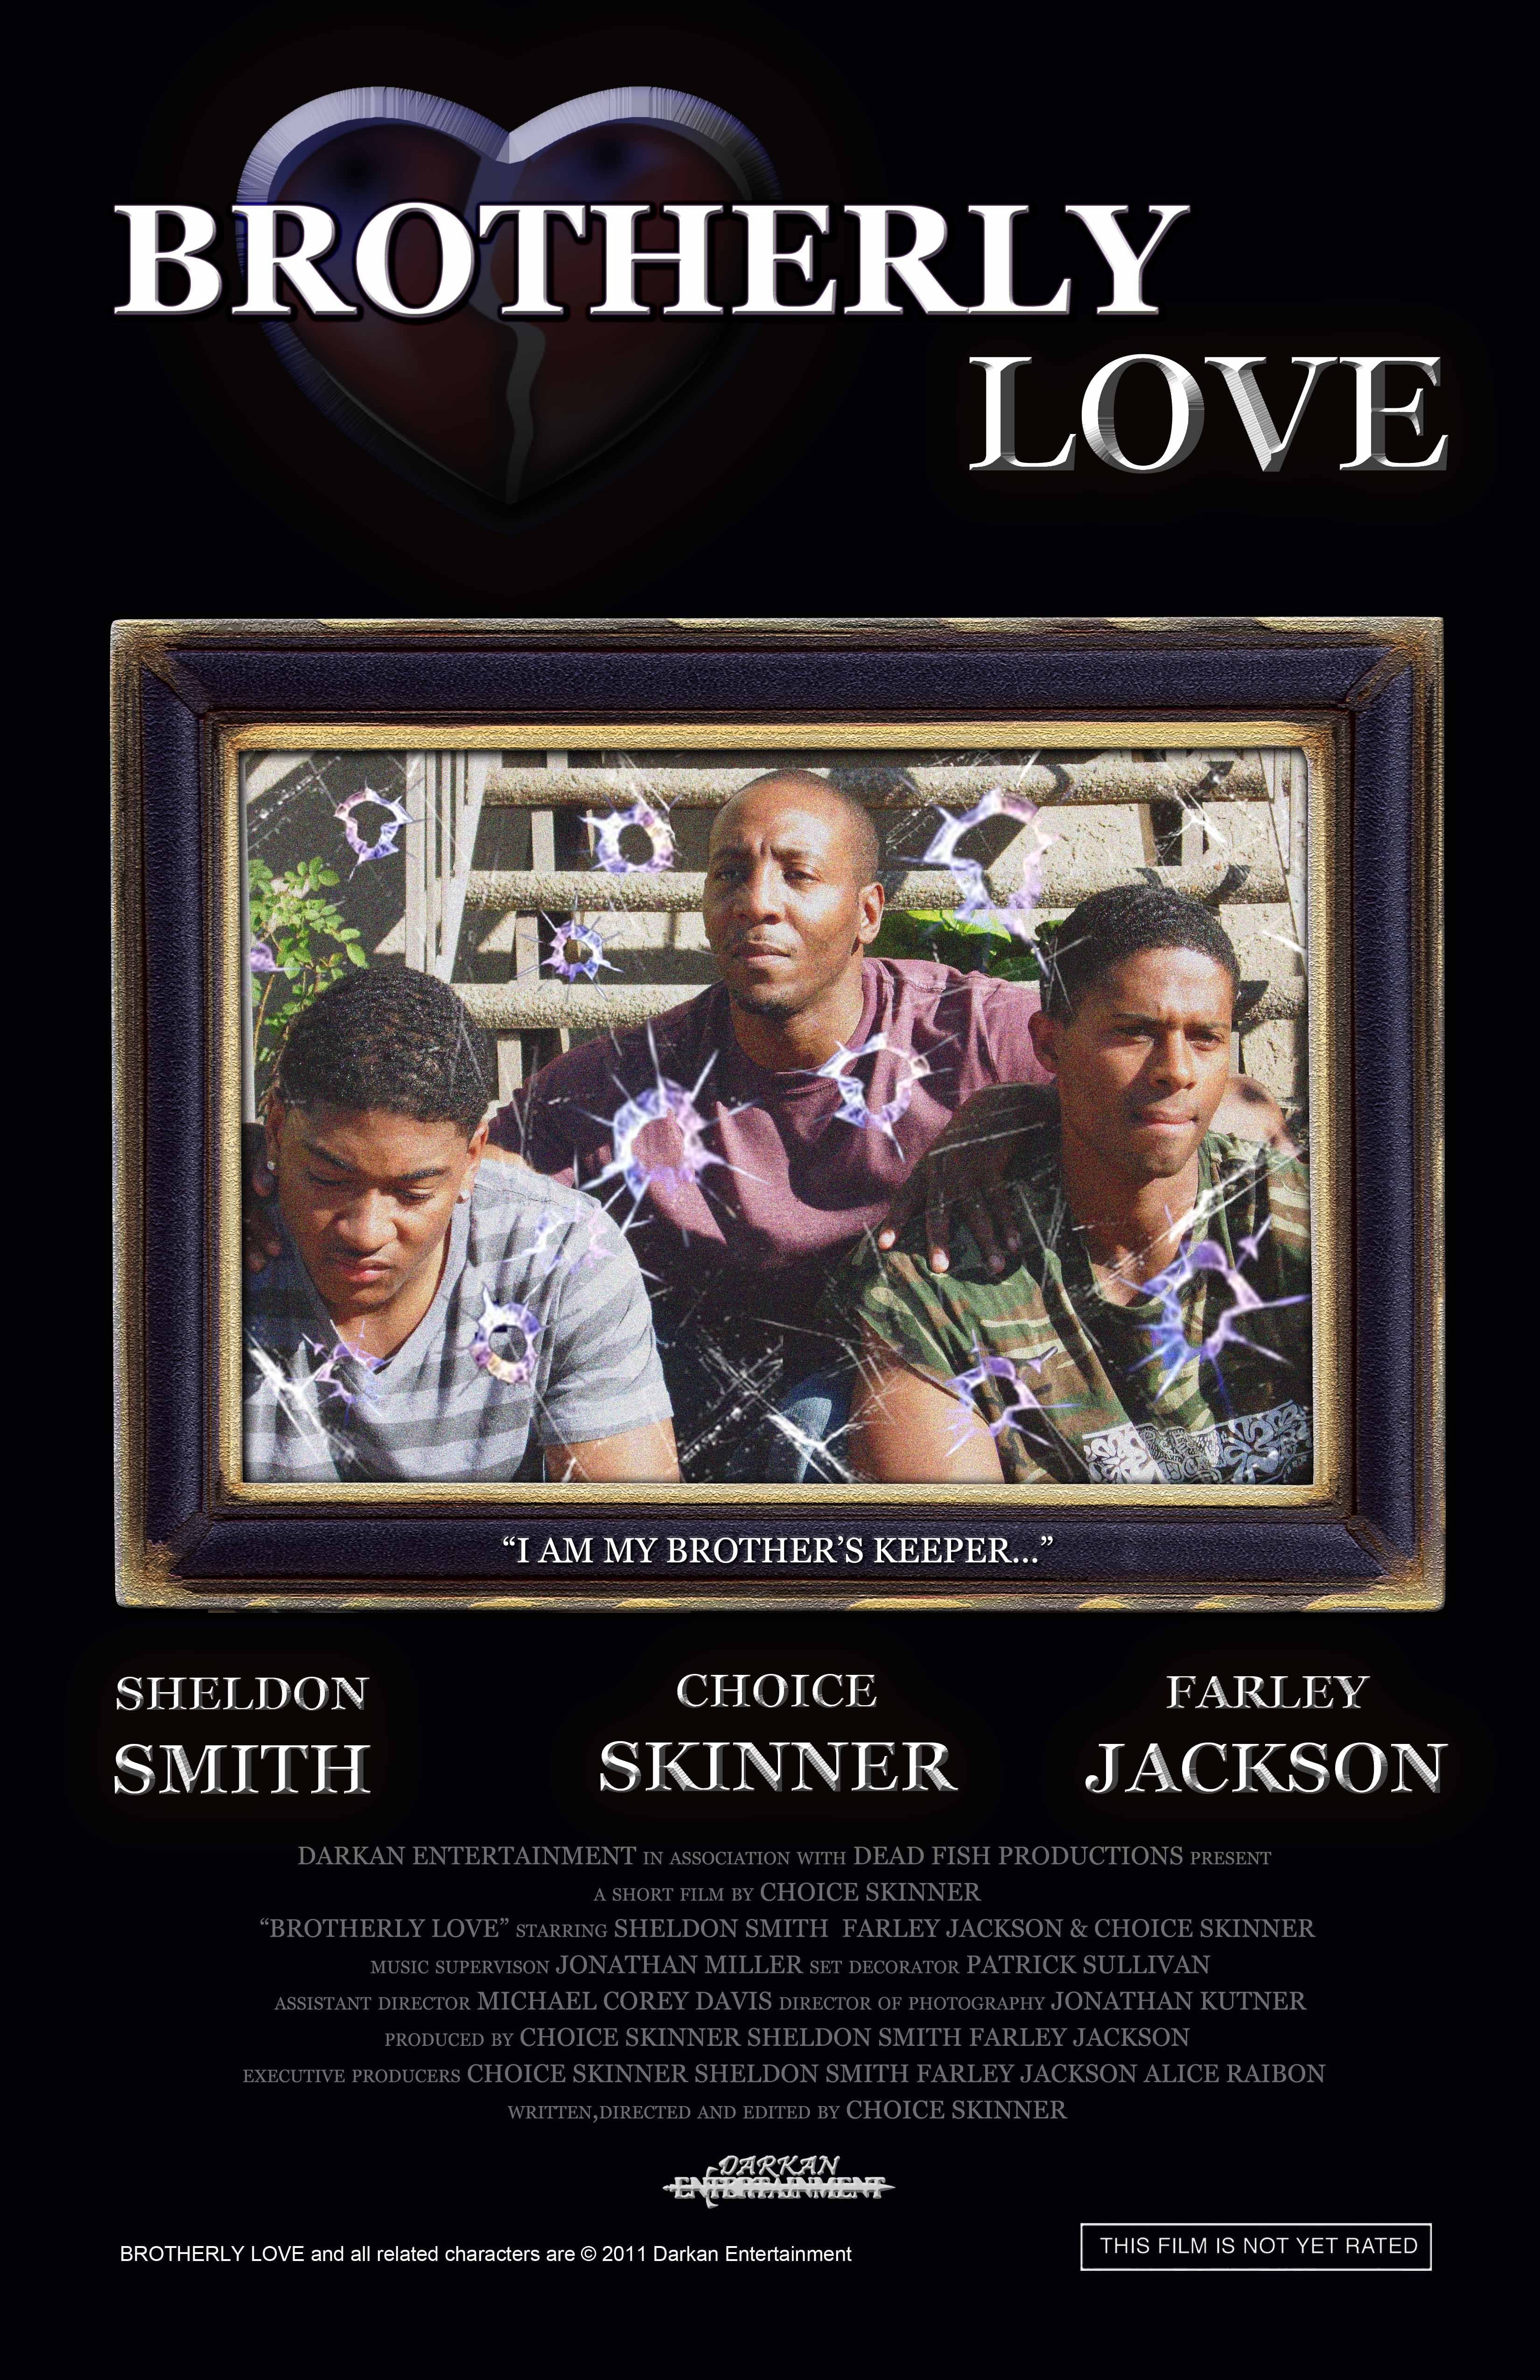 Official Brotherly Love Film Poster